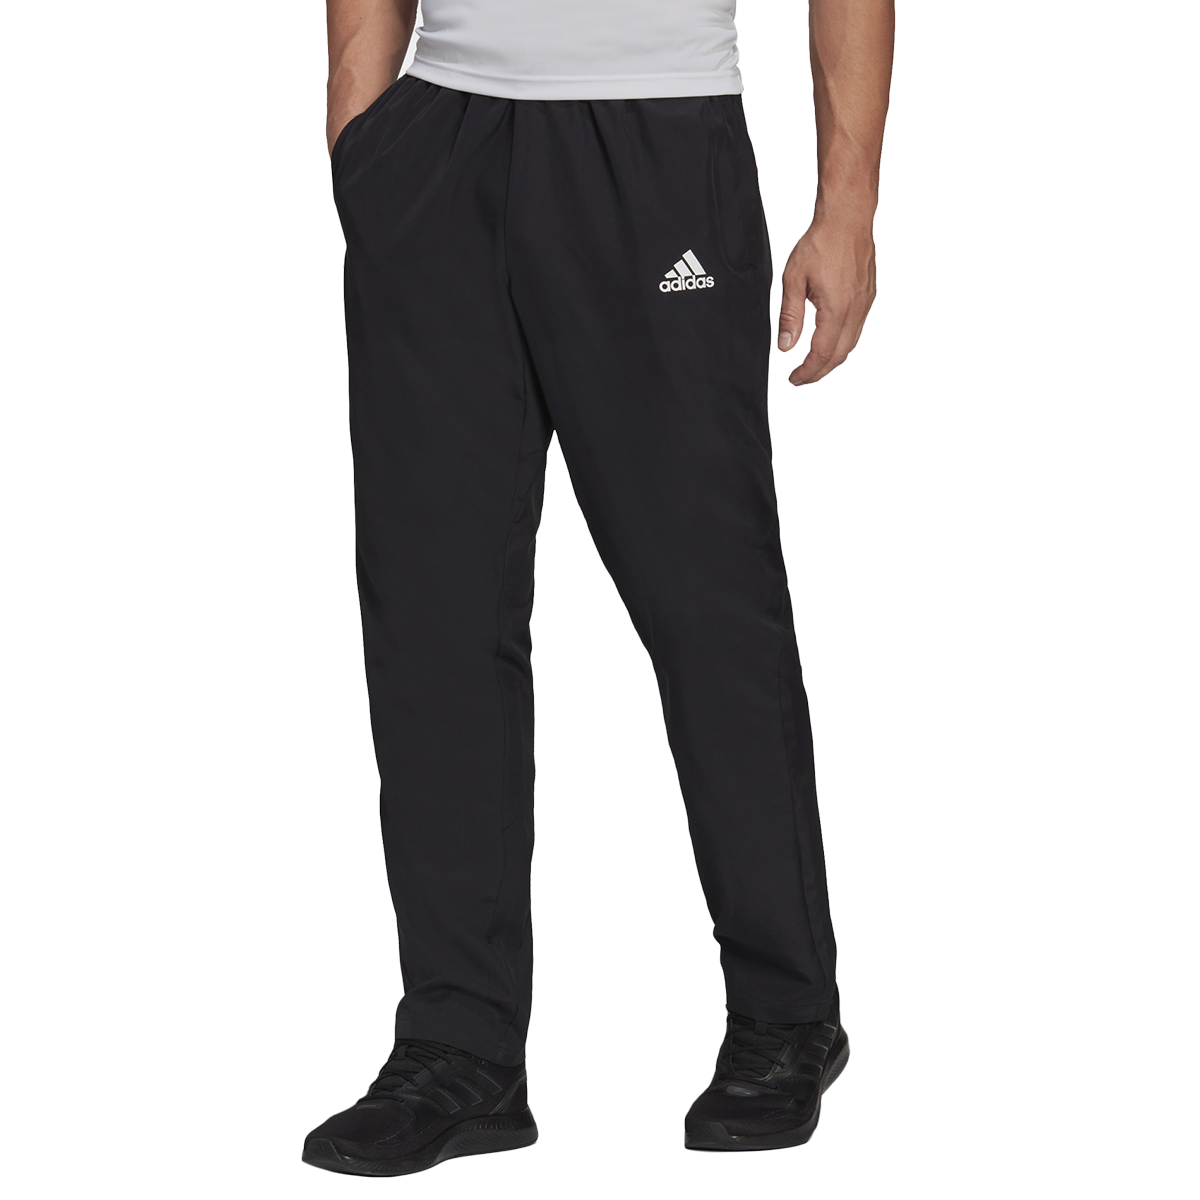  adidas Men's Designed 2 Move Woven Pants, Black, X-Small :  Clothing, Shoes & Jewelry